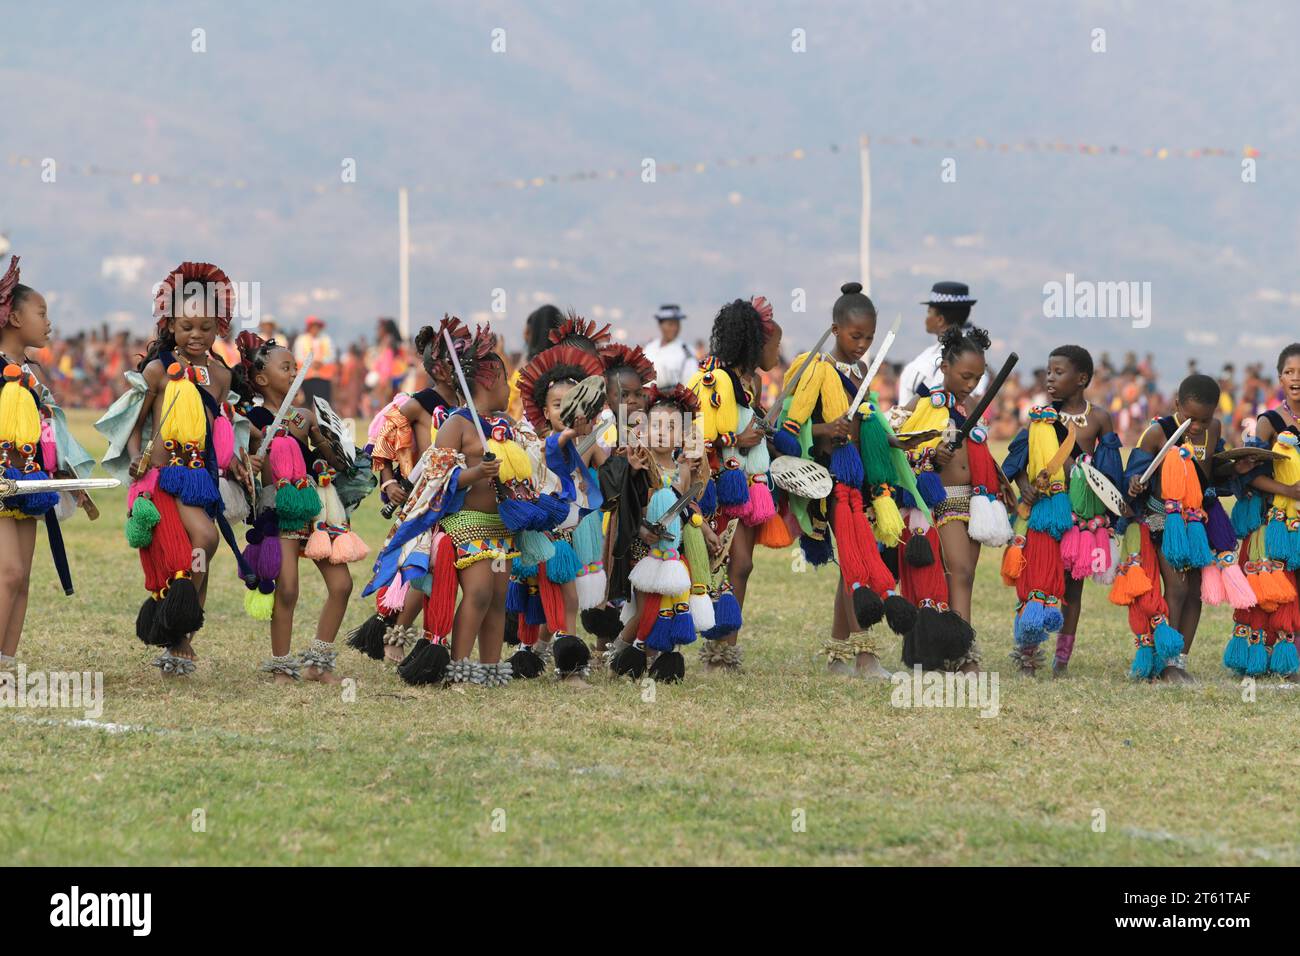 Row of young girls in traditional Swazi dance dress, Umhlanga reed dance ceremony 2023, Kingdom of Eswatini, African cultures, colourful clothes Stock Photo